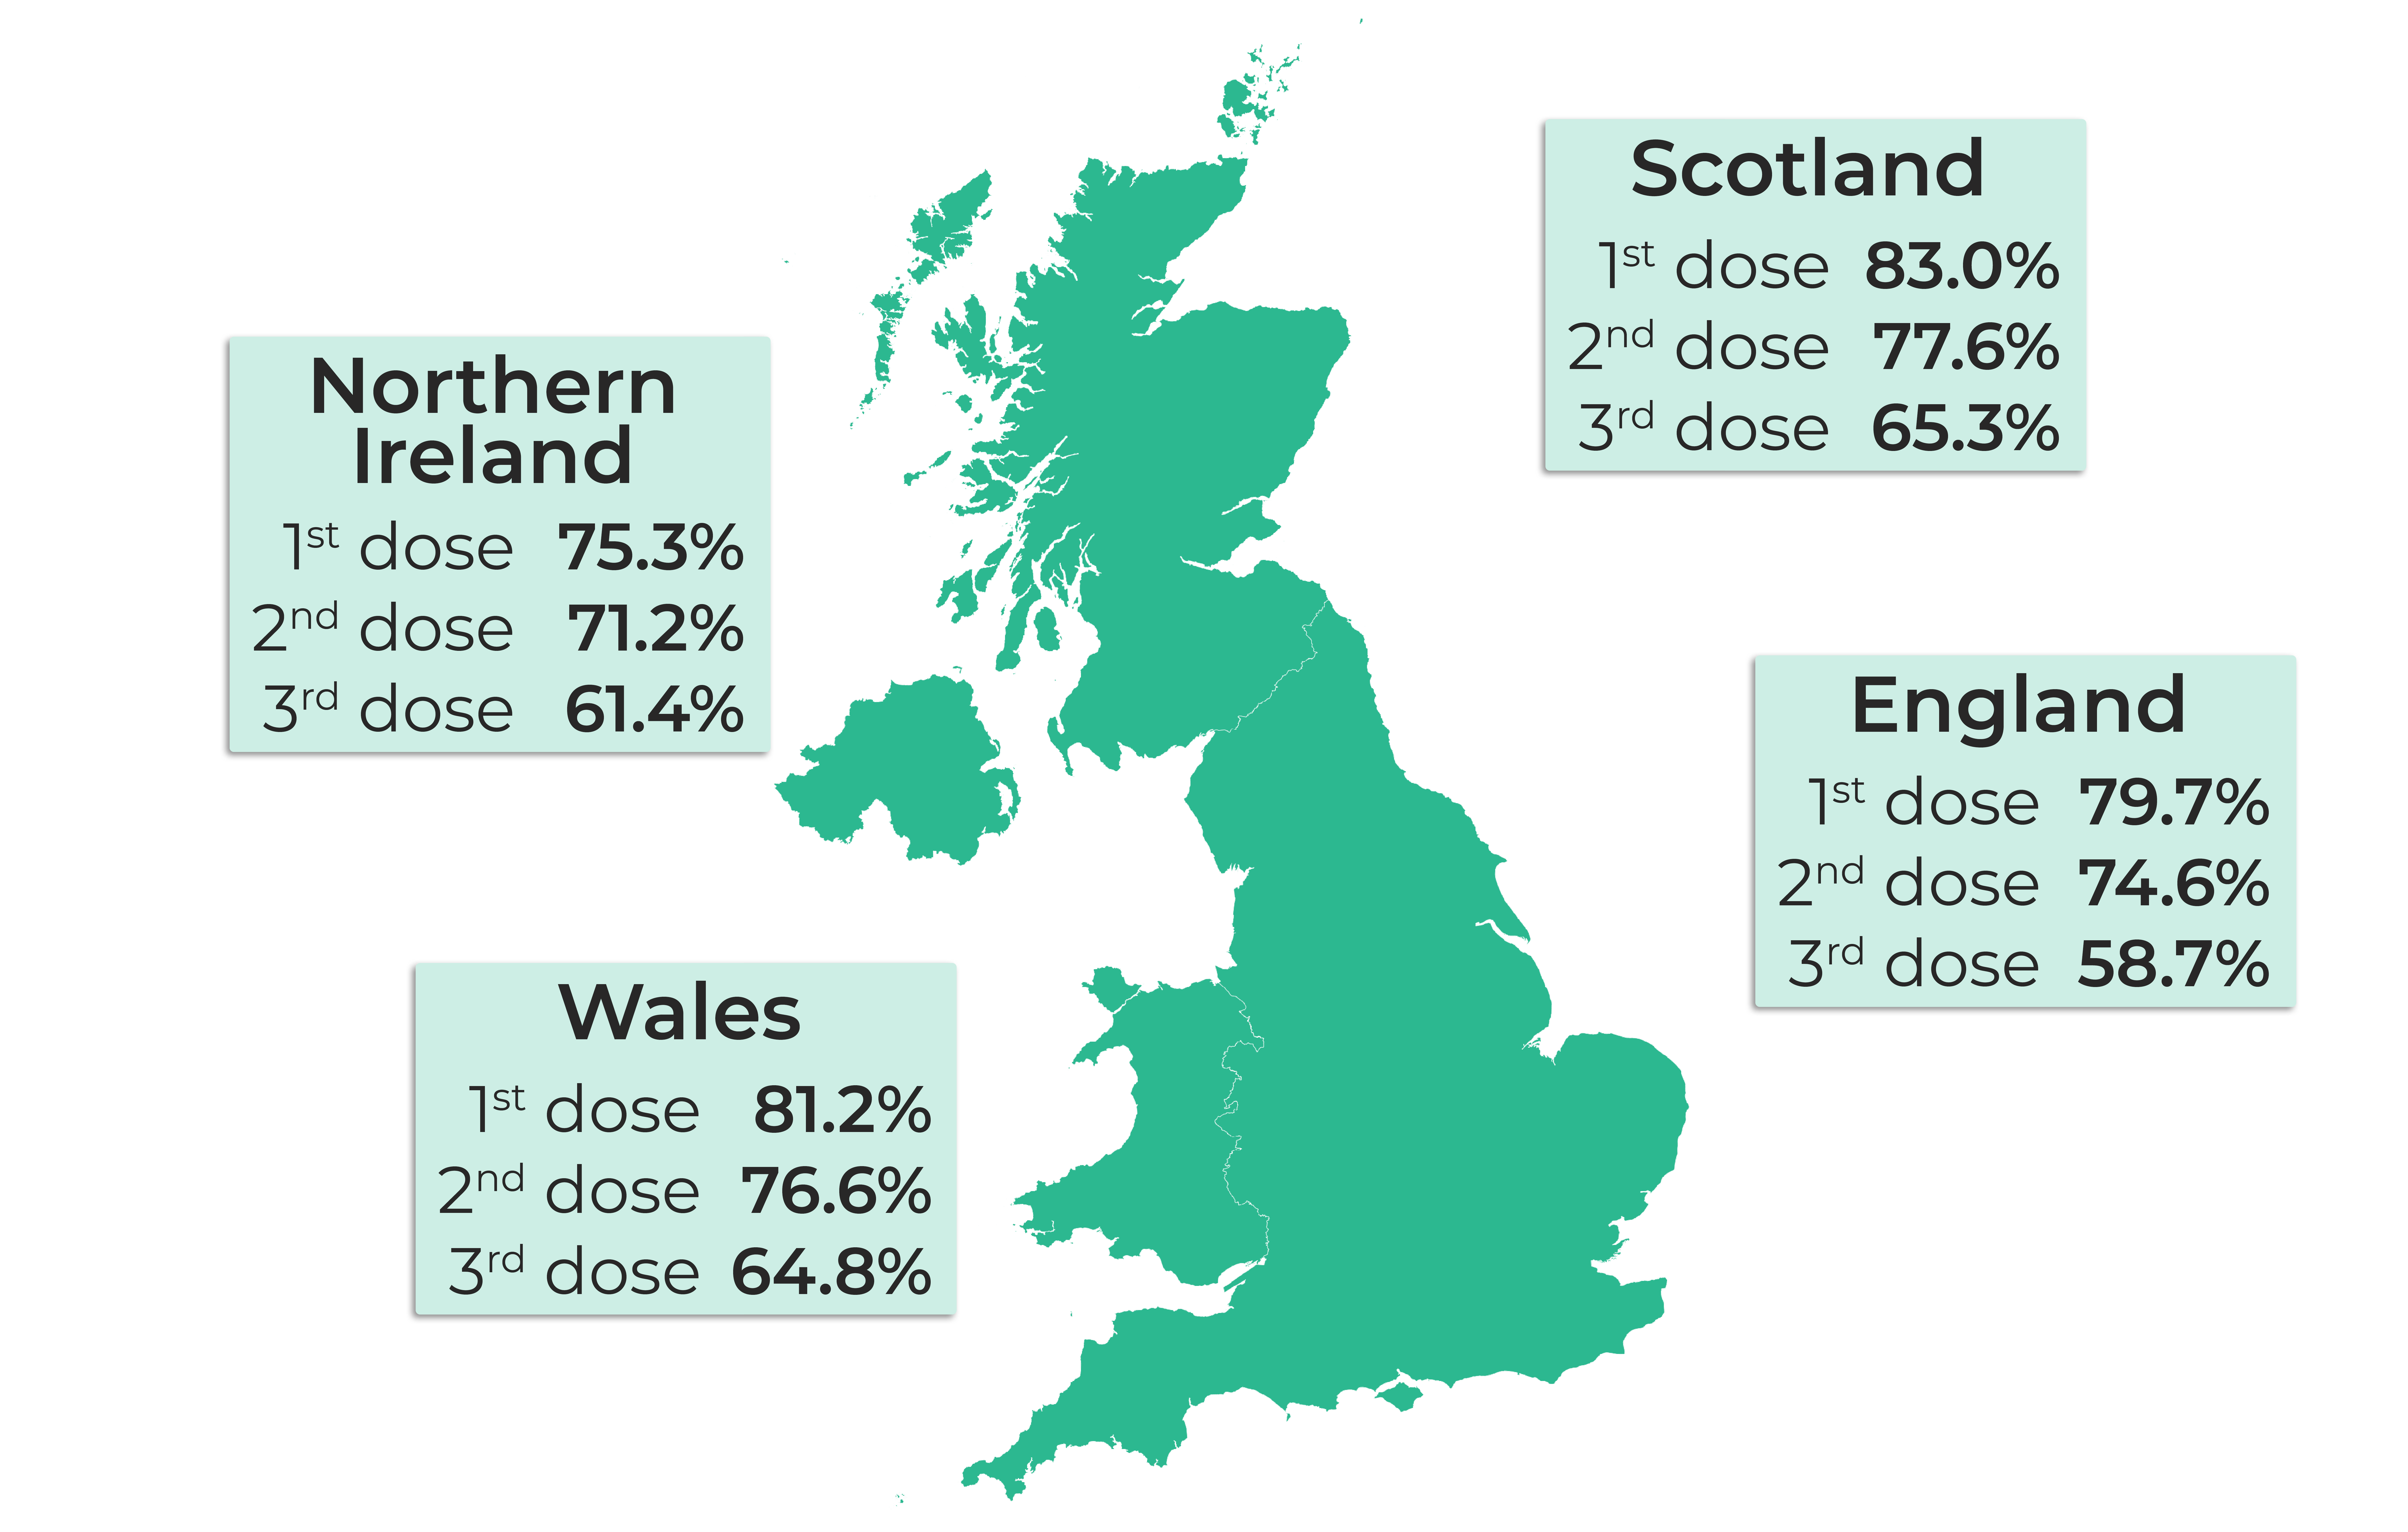 Map of the UK showing: Wales 1st dose, 81.2%. Wales 2nd dose, 76.6%. Wales 3rd dose, 64.8%. England 1st dose, 79.7%. England 2nd dose, 74.6%. England 3rd dose, 58.7%. Scotland 1st dose, 83%. Scotland 2nd dose, 77.6%. Scotland 3rd dose, 65.3%. Northern Ireland 1st dose, 75.3%. Northern Ireland 2nd dose, 71.2%. Northern Ireland 3rd dose, 61.4%.